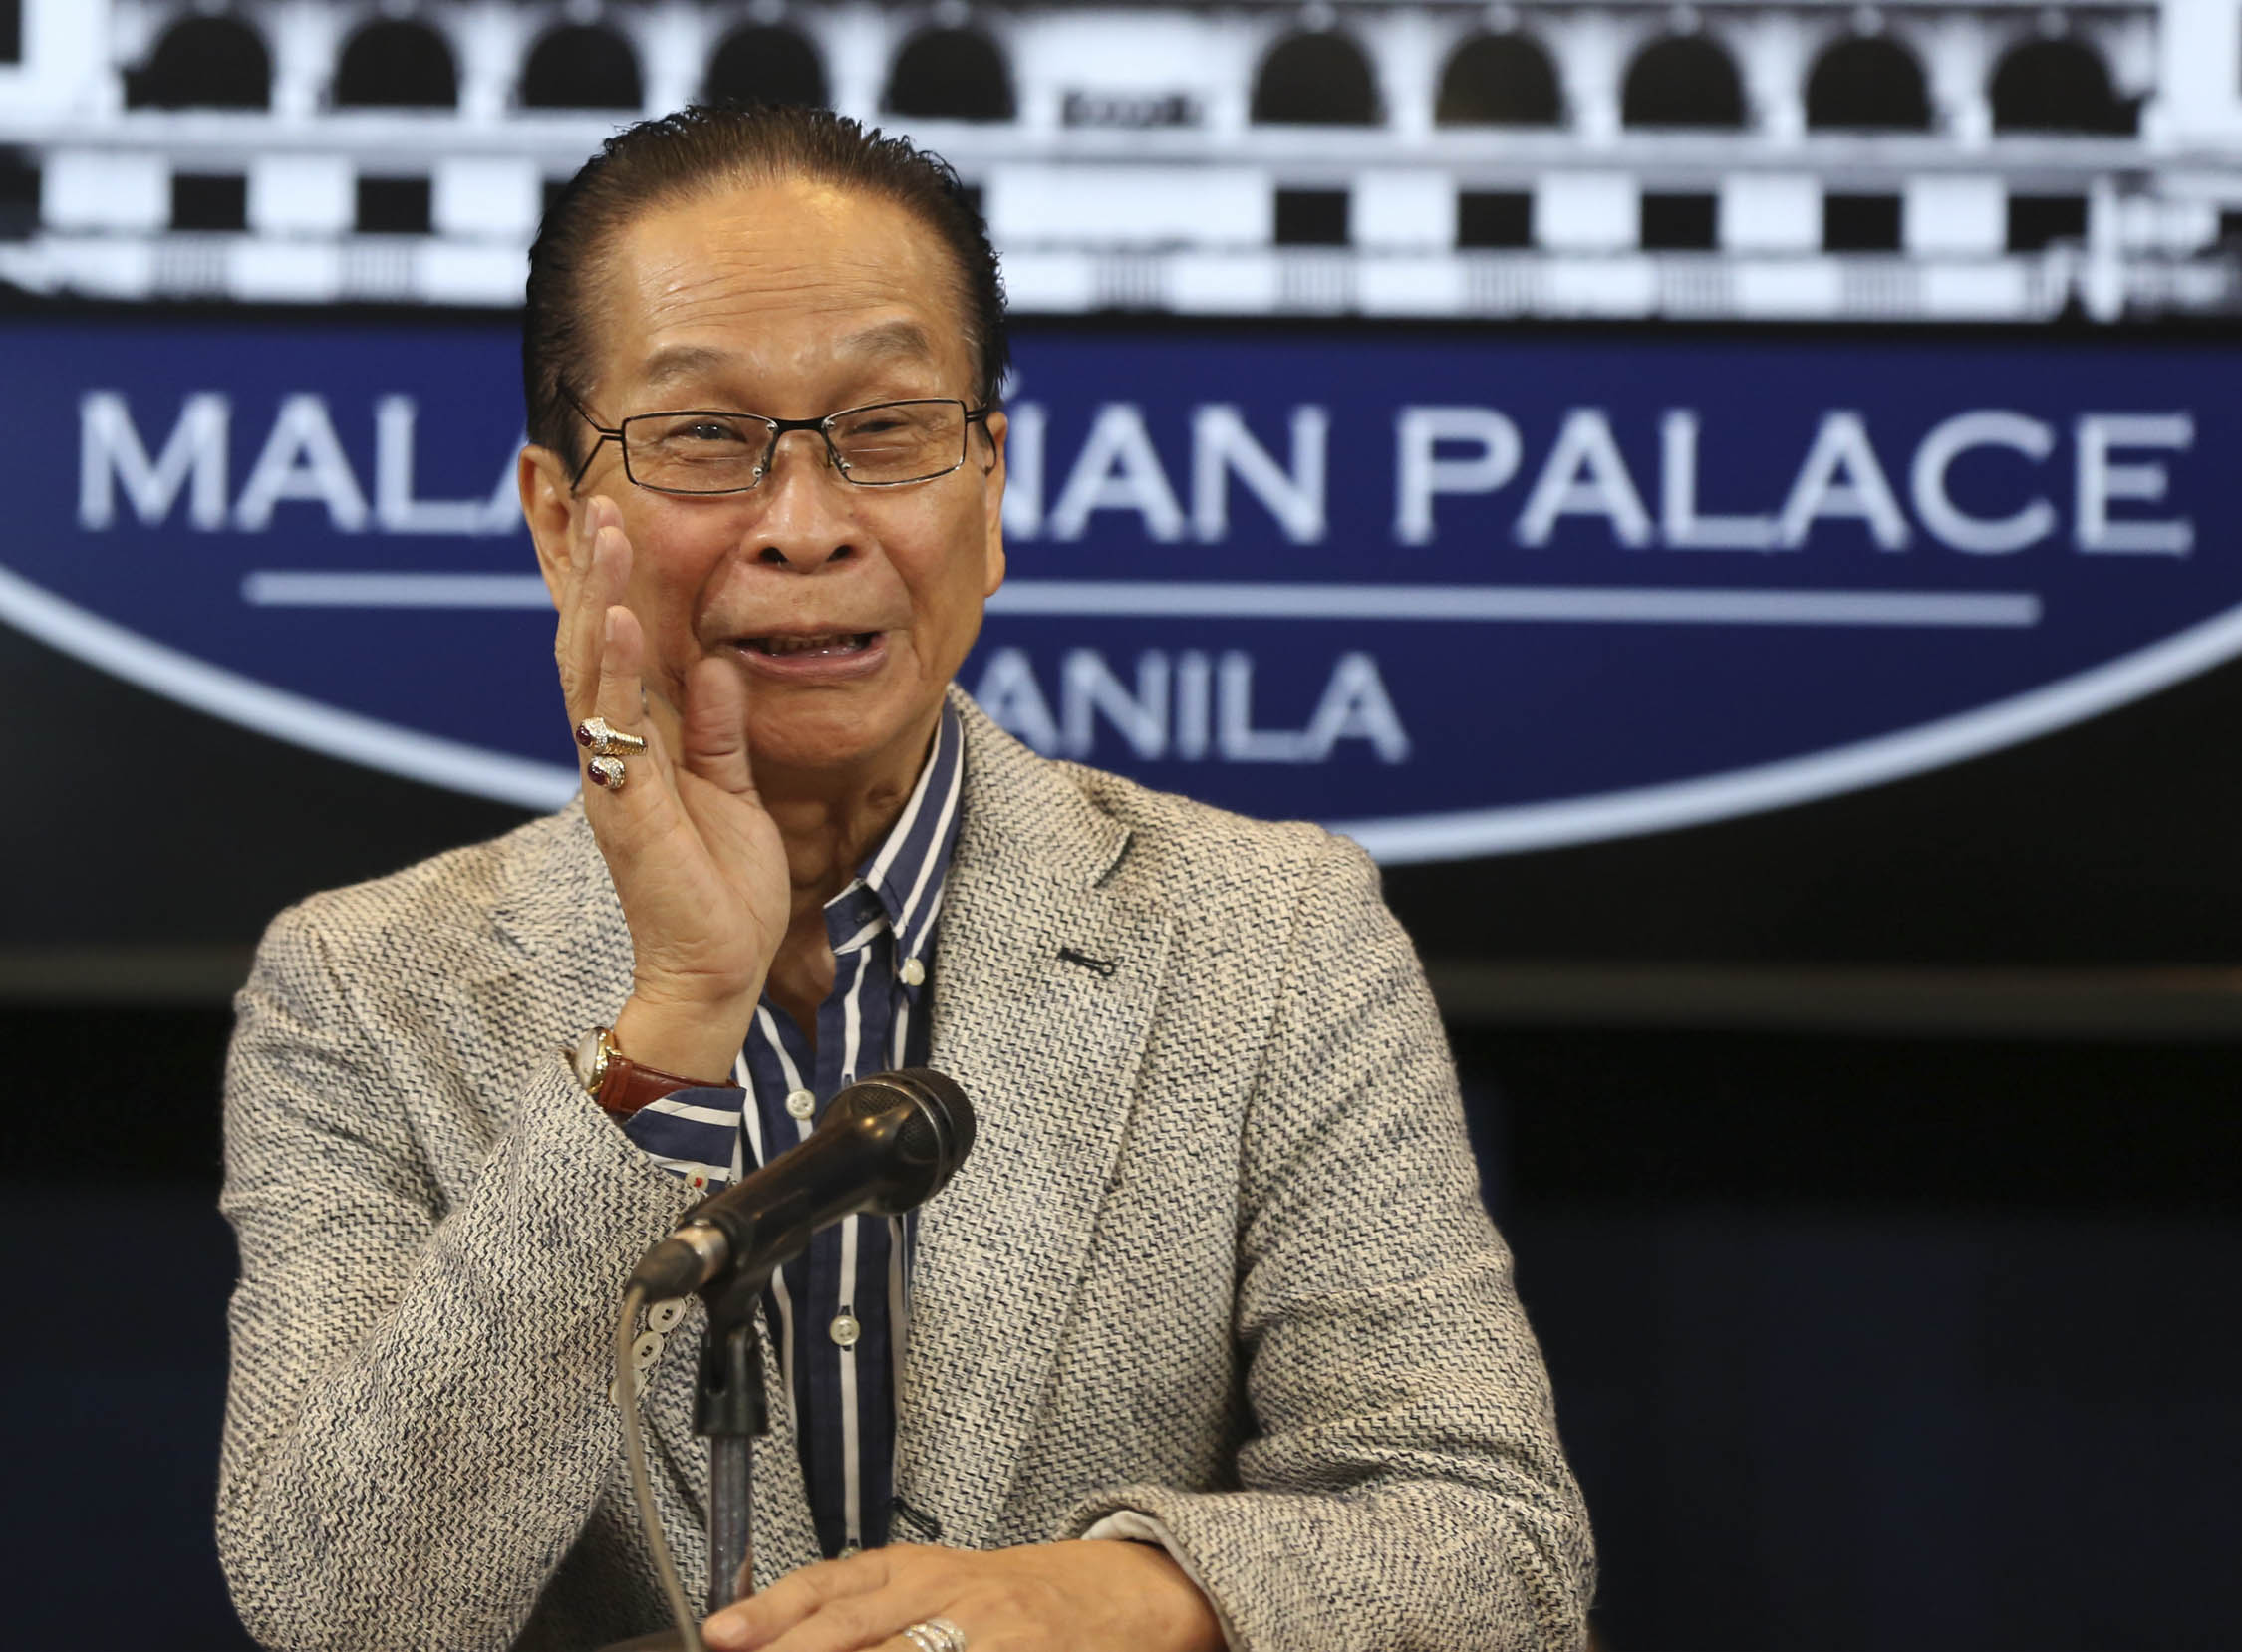 Palace: Nothing 'obscene' on Duterte's story about molesting a maid